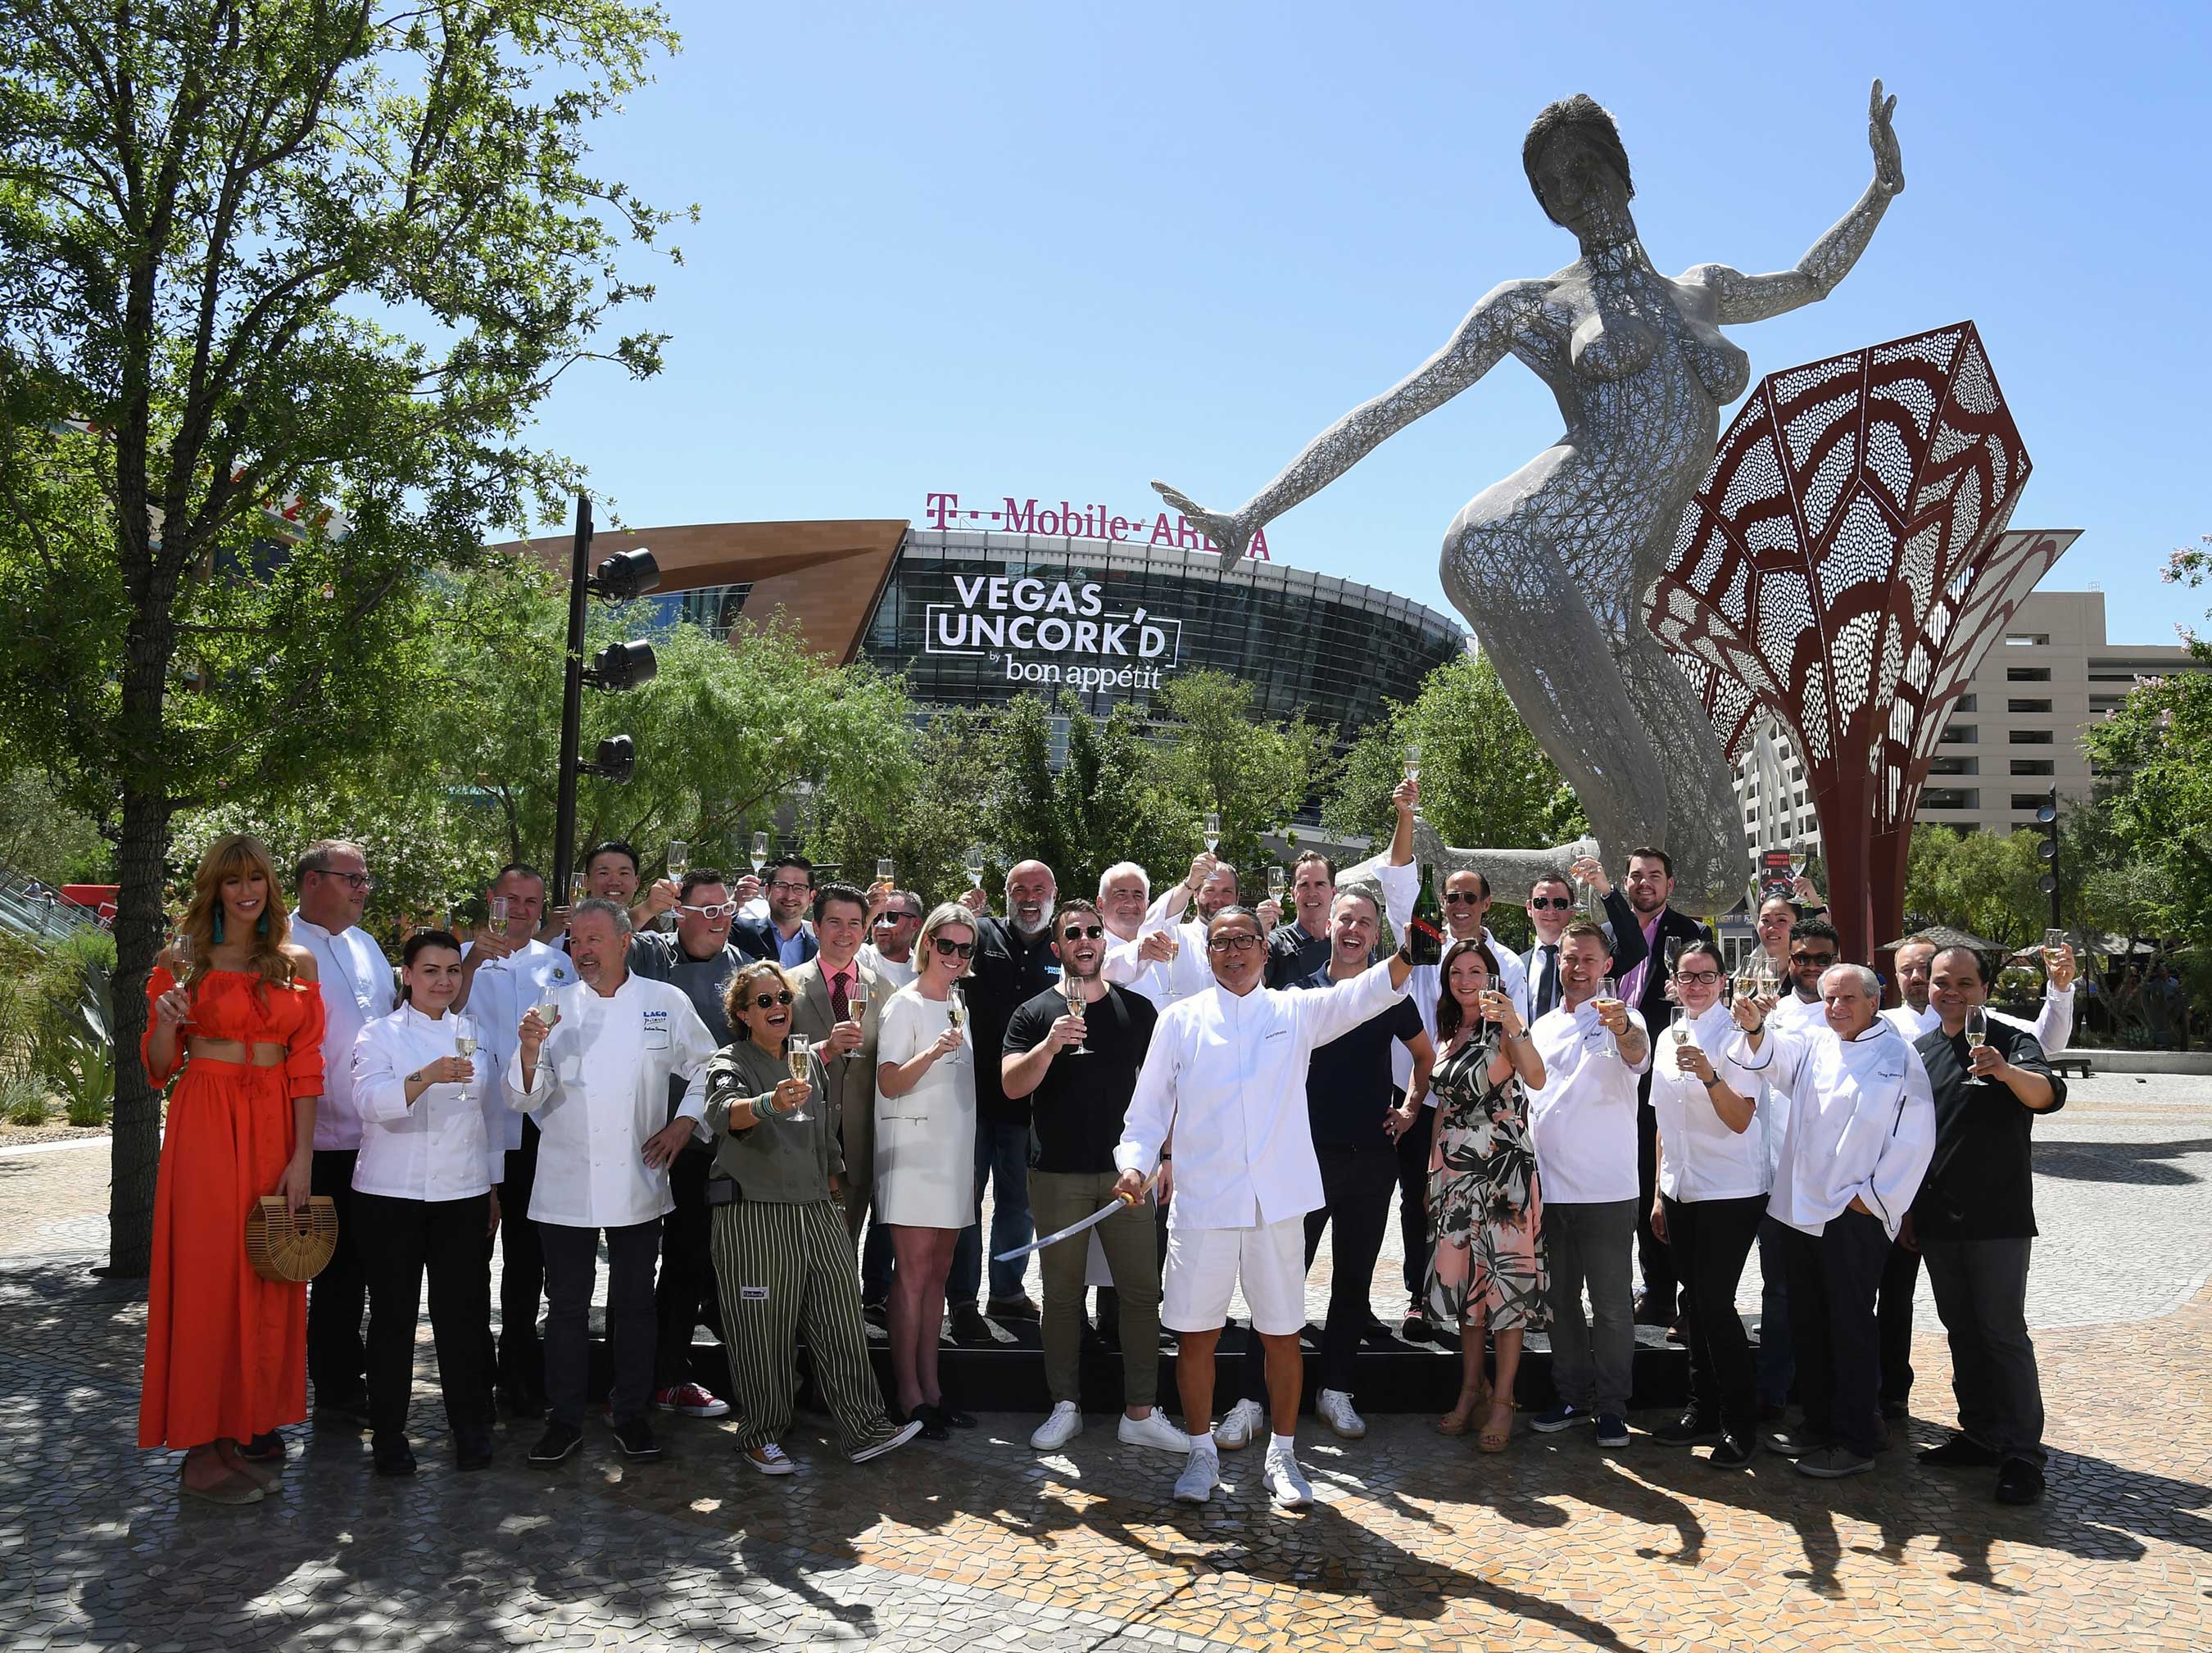 Renowned chefs gathered for the 12th annual Vegas Uncork’d by Bon Appétit Saber Off at MGM Resorts’ The Park (credit Las Vegas News Bureau)